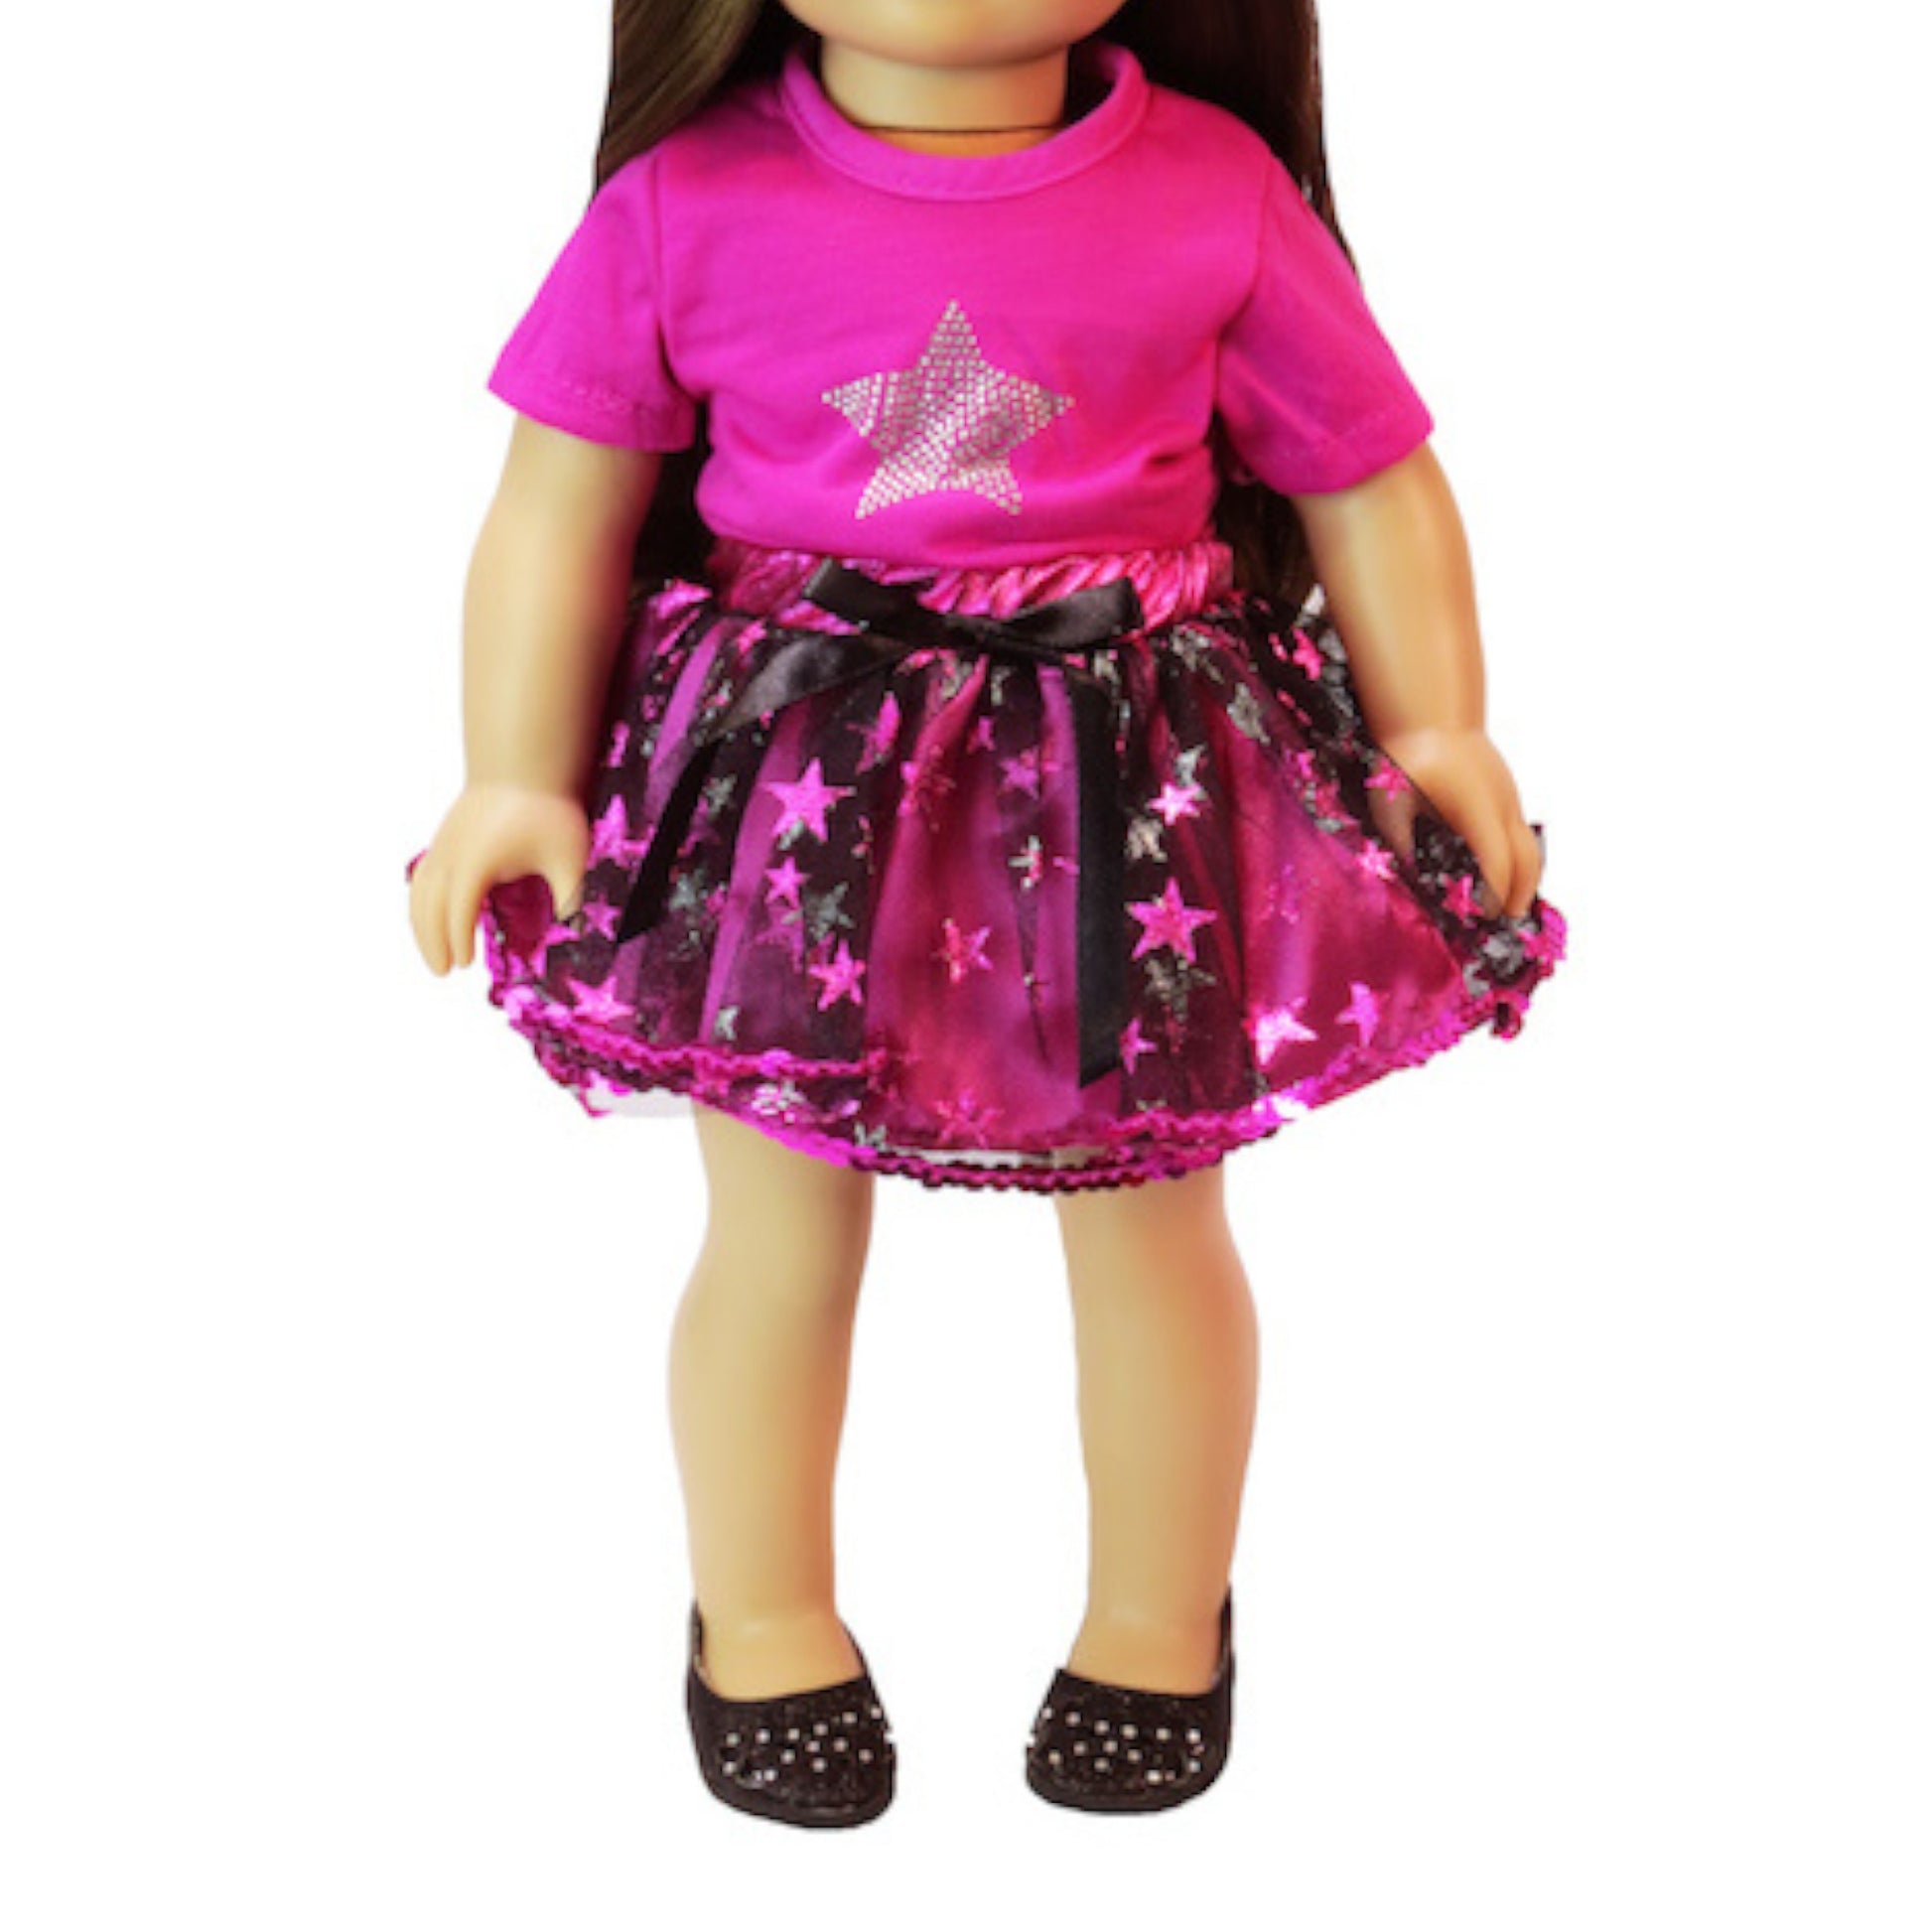 Super Star Tutu Skirt Set for 18-inch dolls with doll